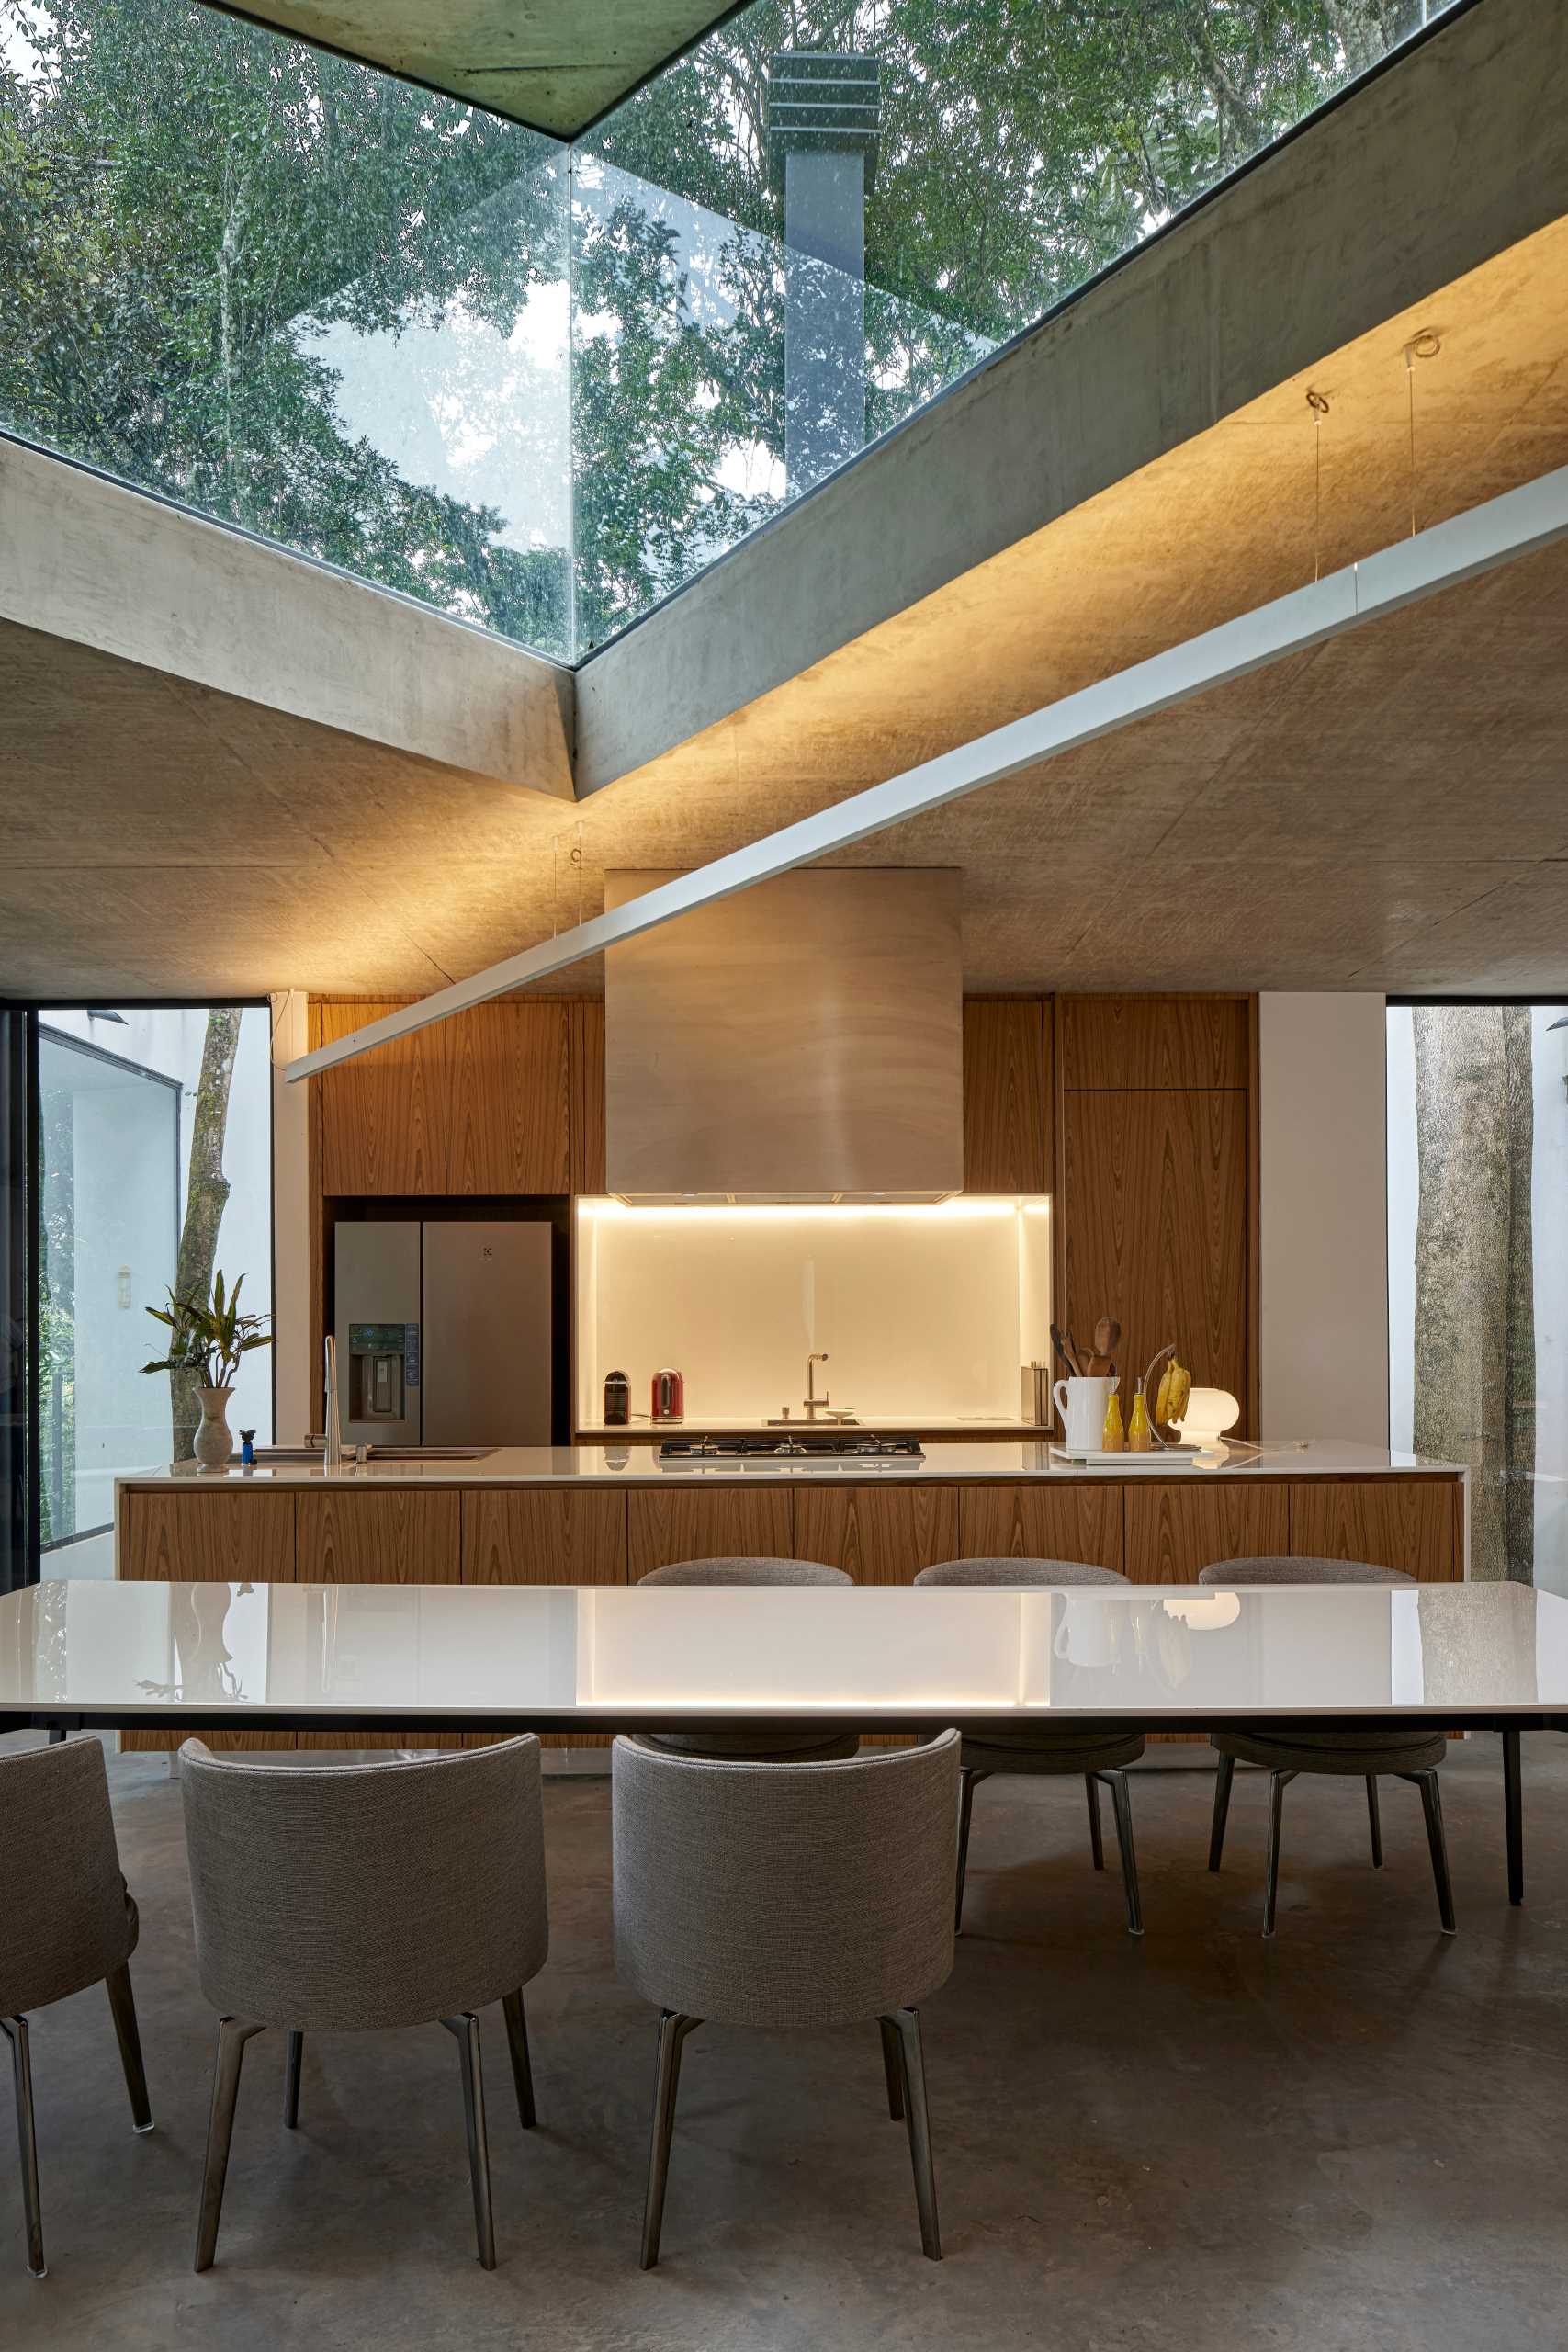 Inside this modern home, the angular design is highlighted by lighting and window shapes, while the living, dining, and kitchen all share the same open space.